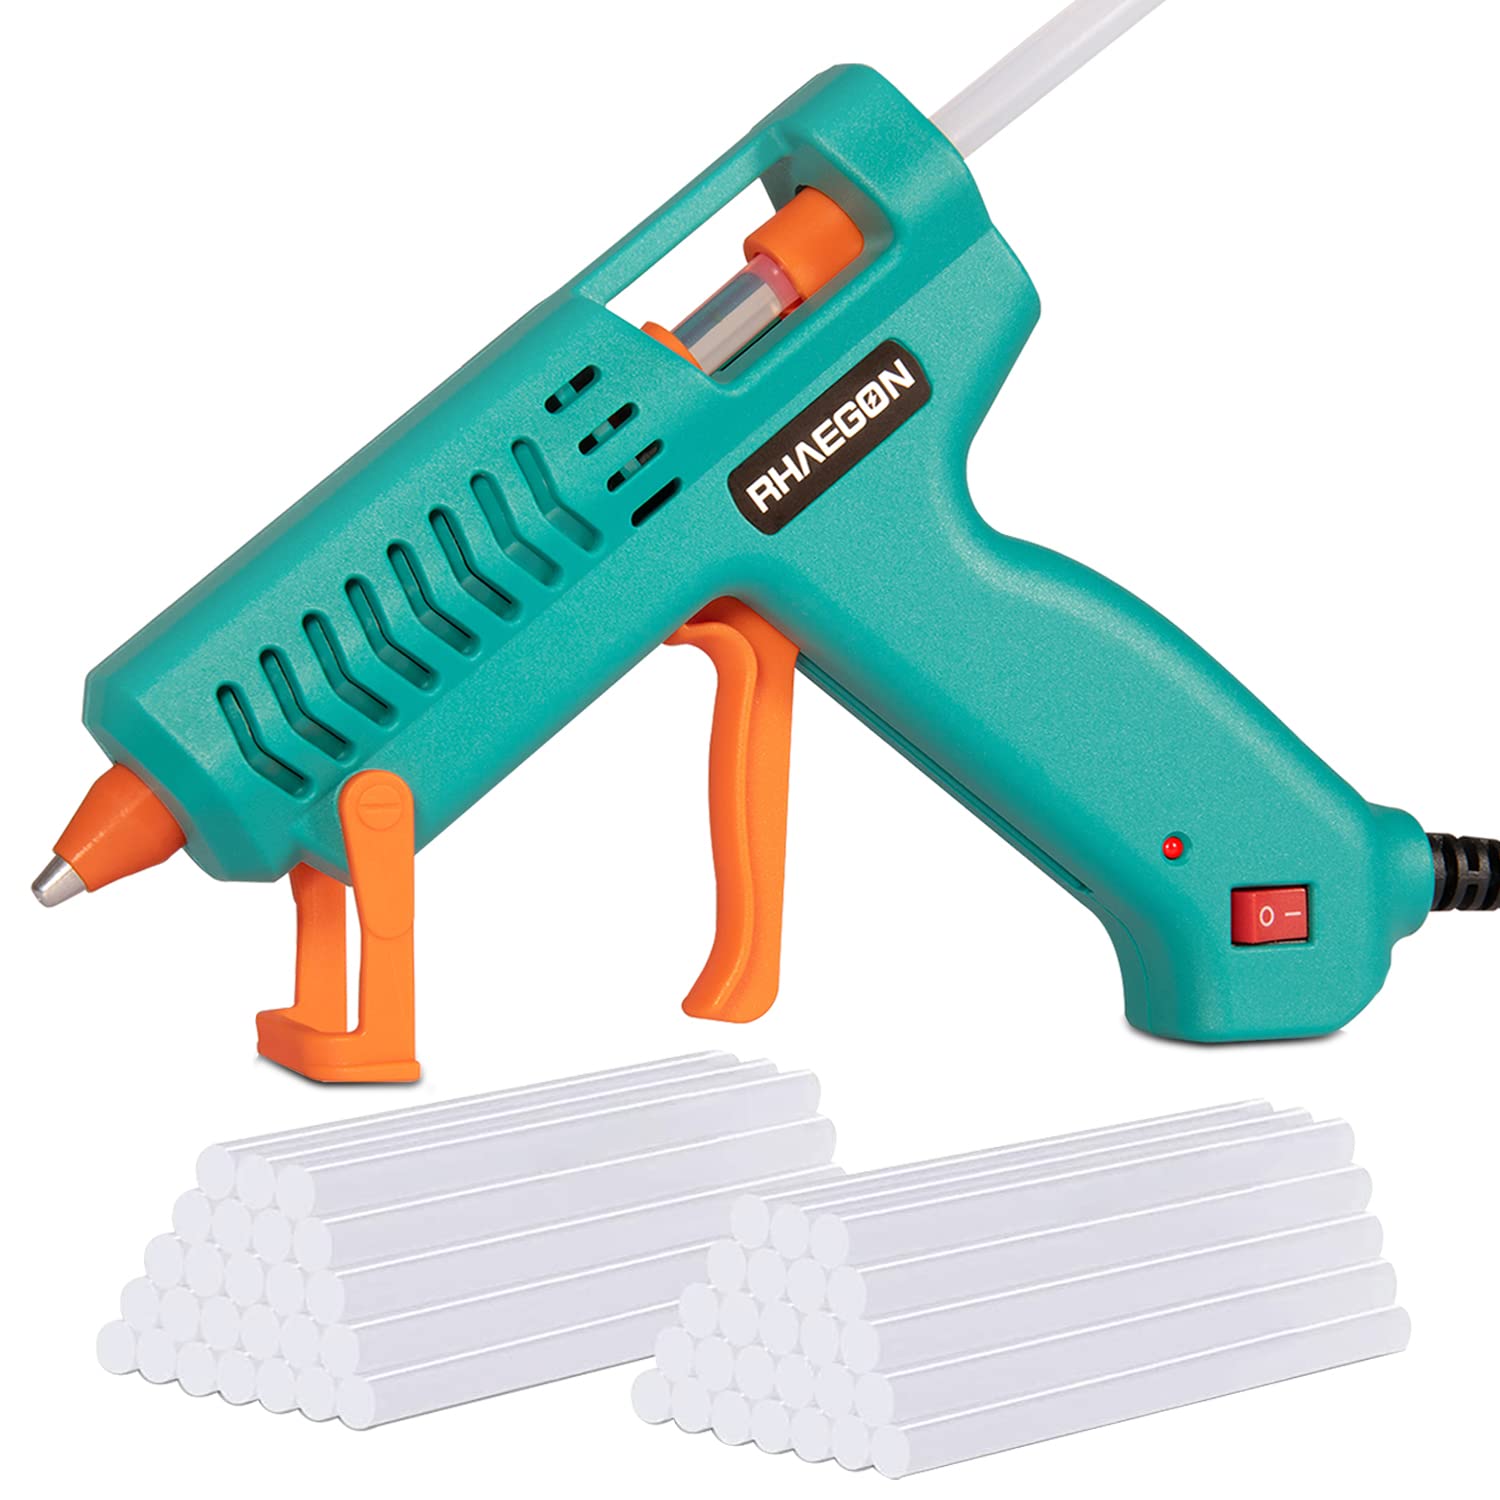 RHAEGON 60W Hot Glue Gun for Crafting and Repairs Drip-free and  Leakage-proof Patent Designs Small Glue Gun Kit with 50pcs Glue Sticks (7mmx130mm)